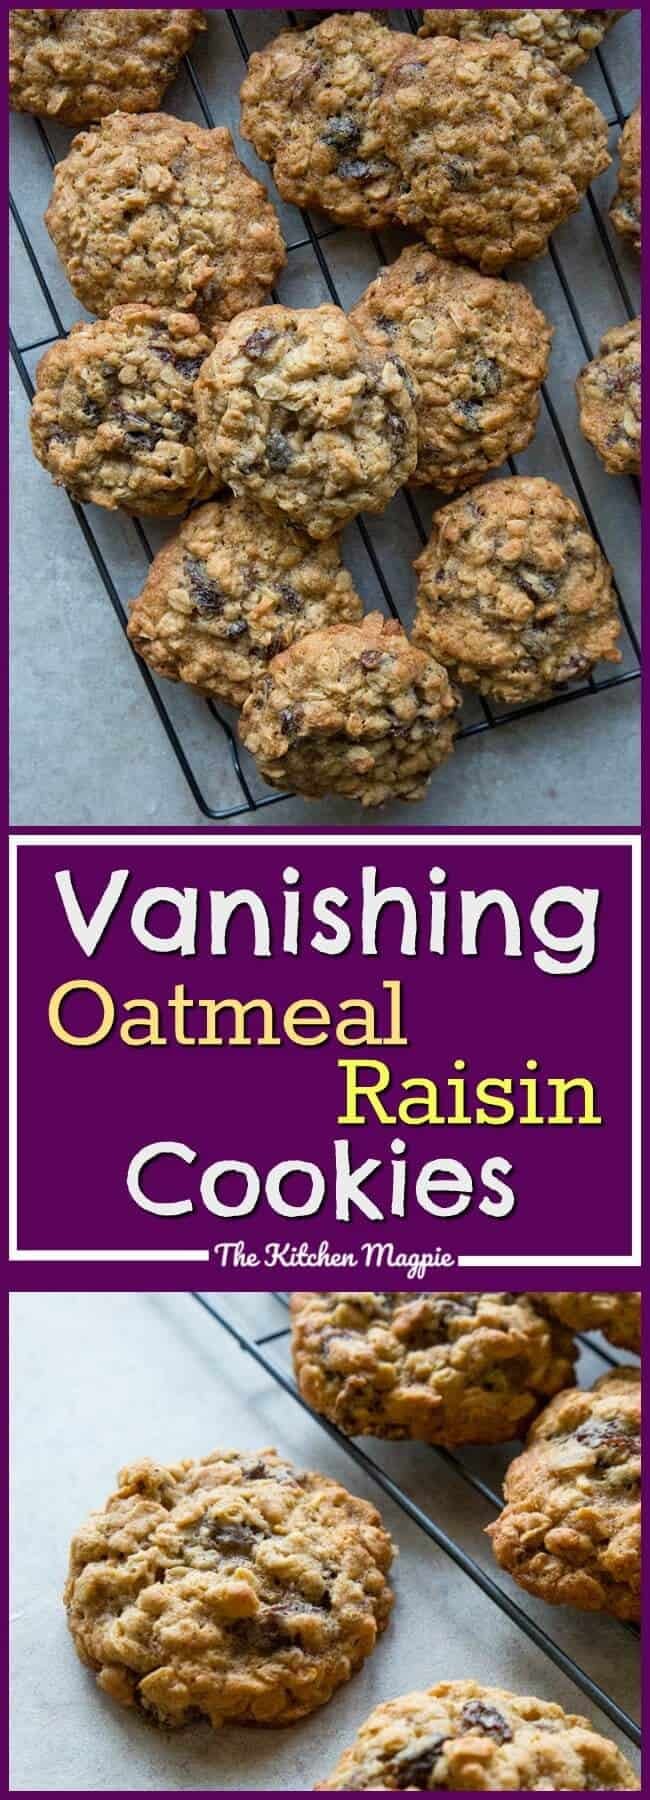 Irish Raisin Cookies R Ed Cipe / Easy and quick St. Patrick's Day Traditional Irish Soda ... : Soaking the raisins gives a boost to the texture…